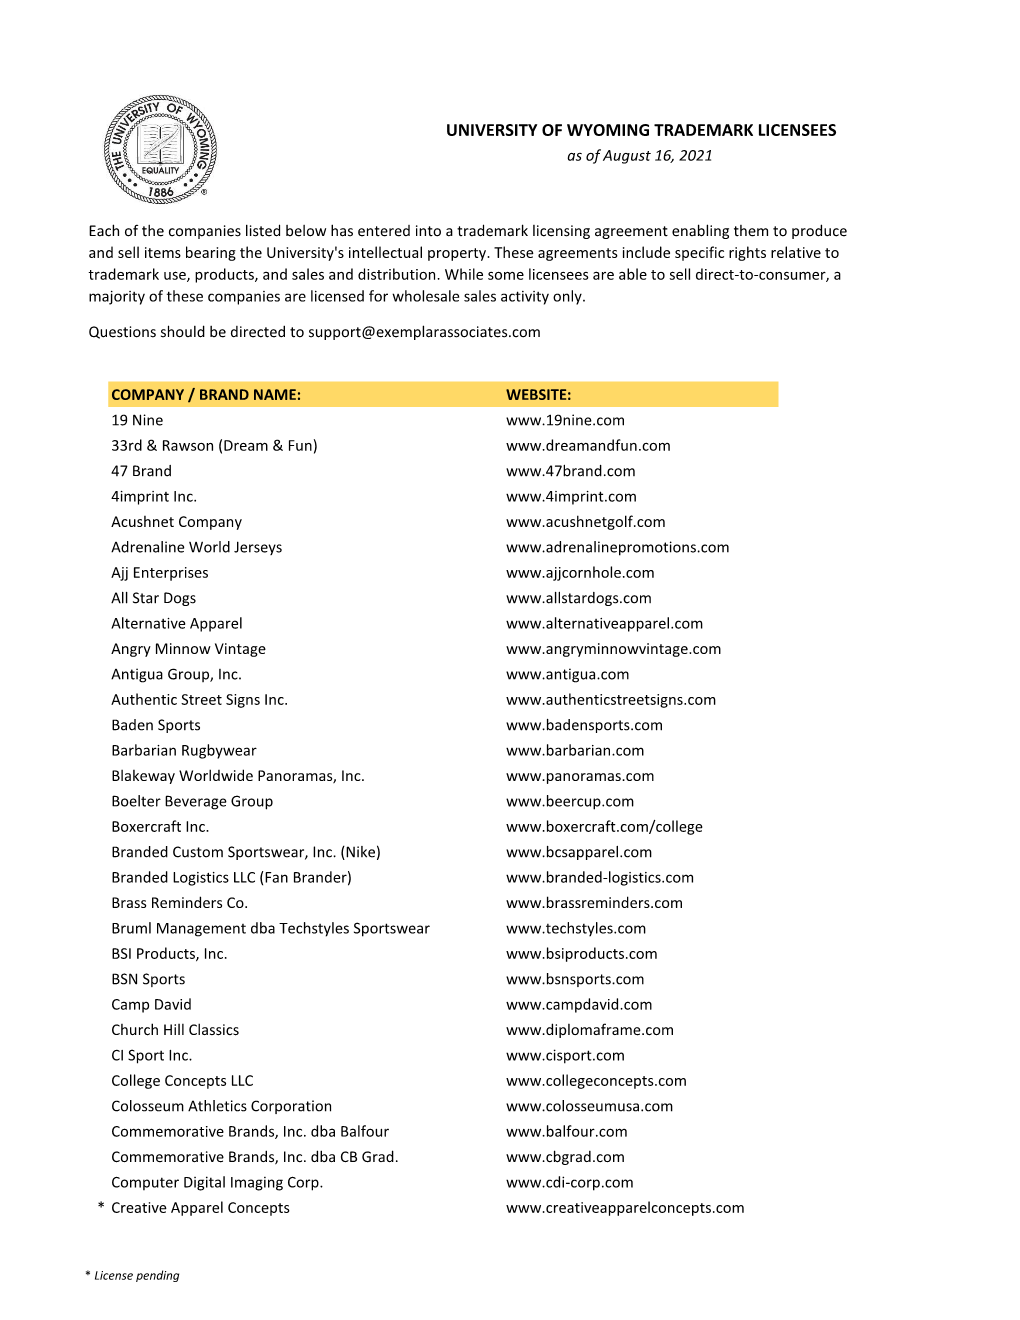 UNIVERSITY of WYOMING TRADEMARK LICENSEES As of August 16, 2021